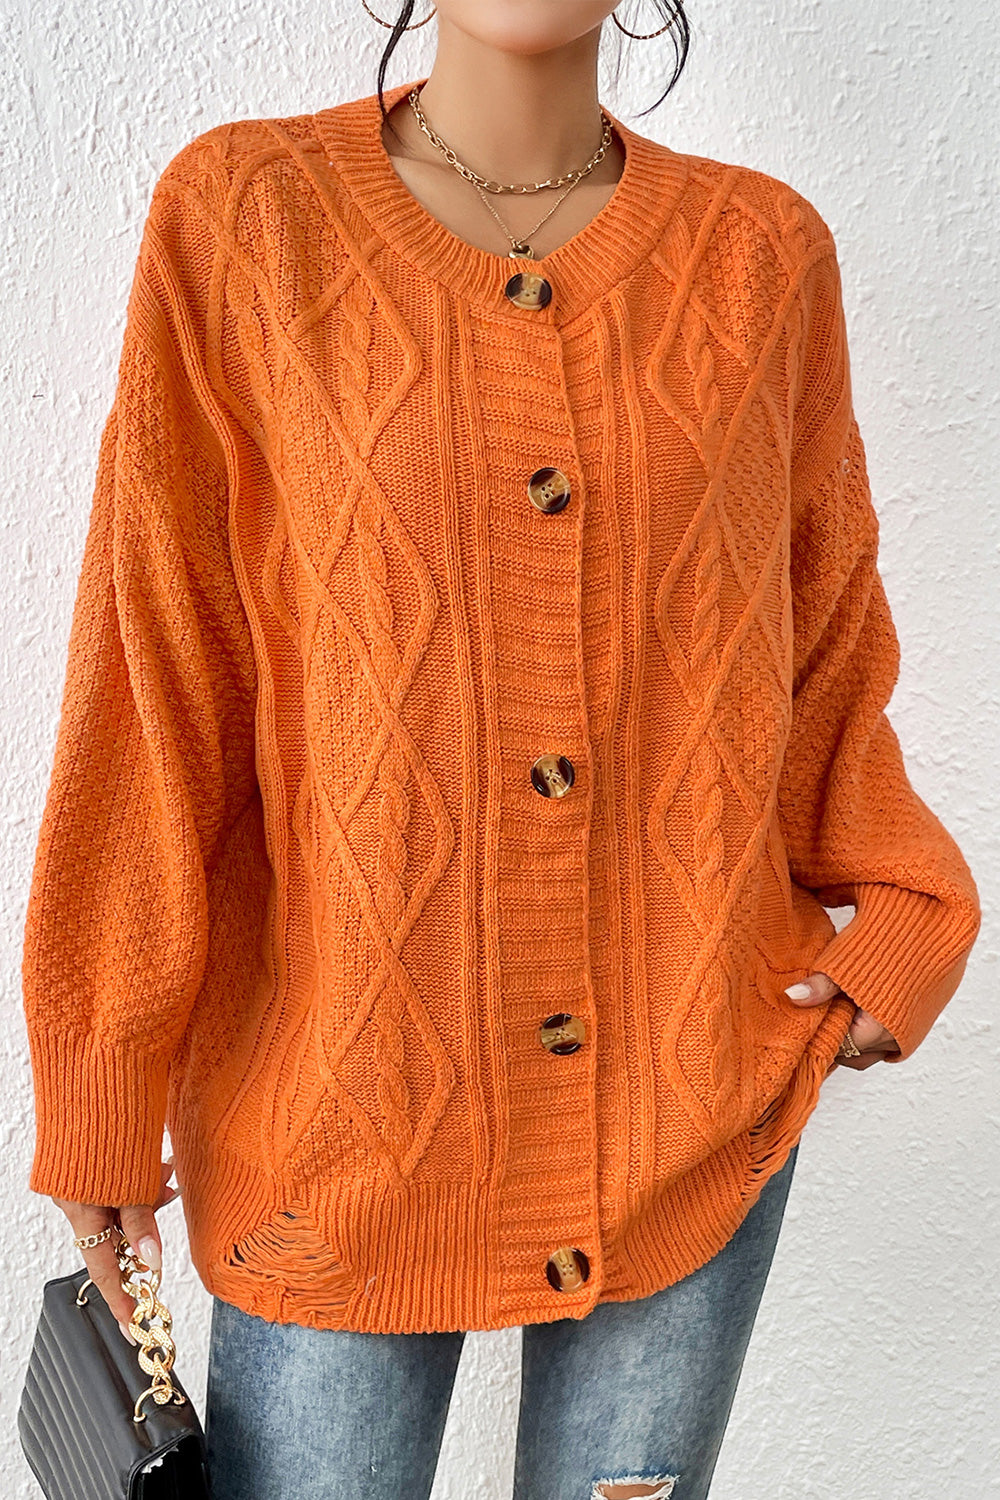 Round Neck Long Sleeve Cardigan - Orange / S - Women’s Clothing & Accessories - Shirts & Tops - 3 - 2024